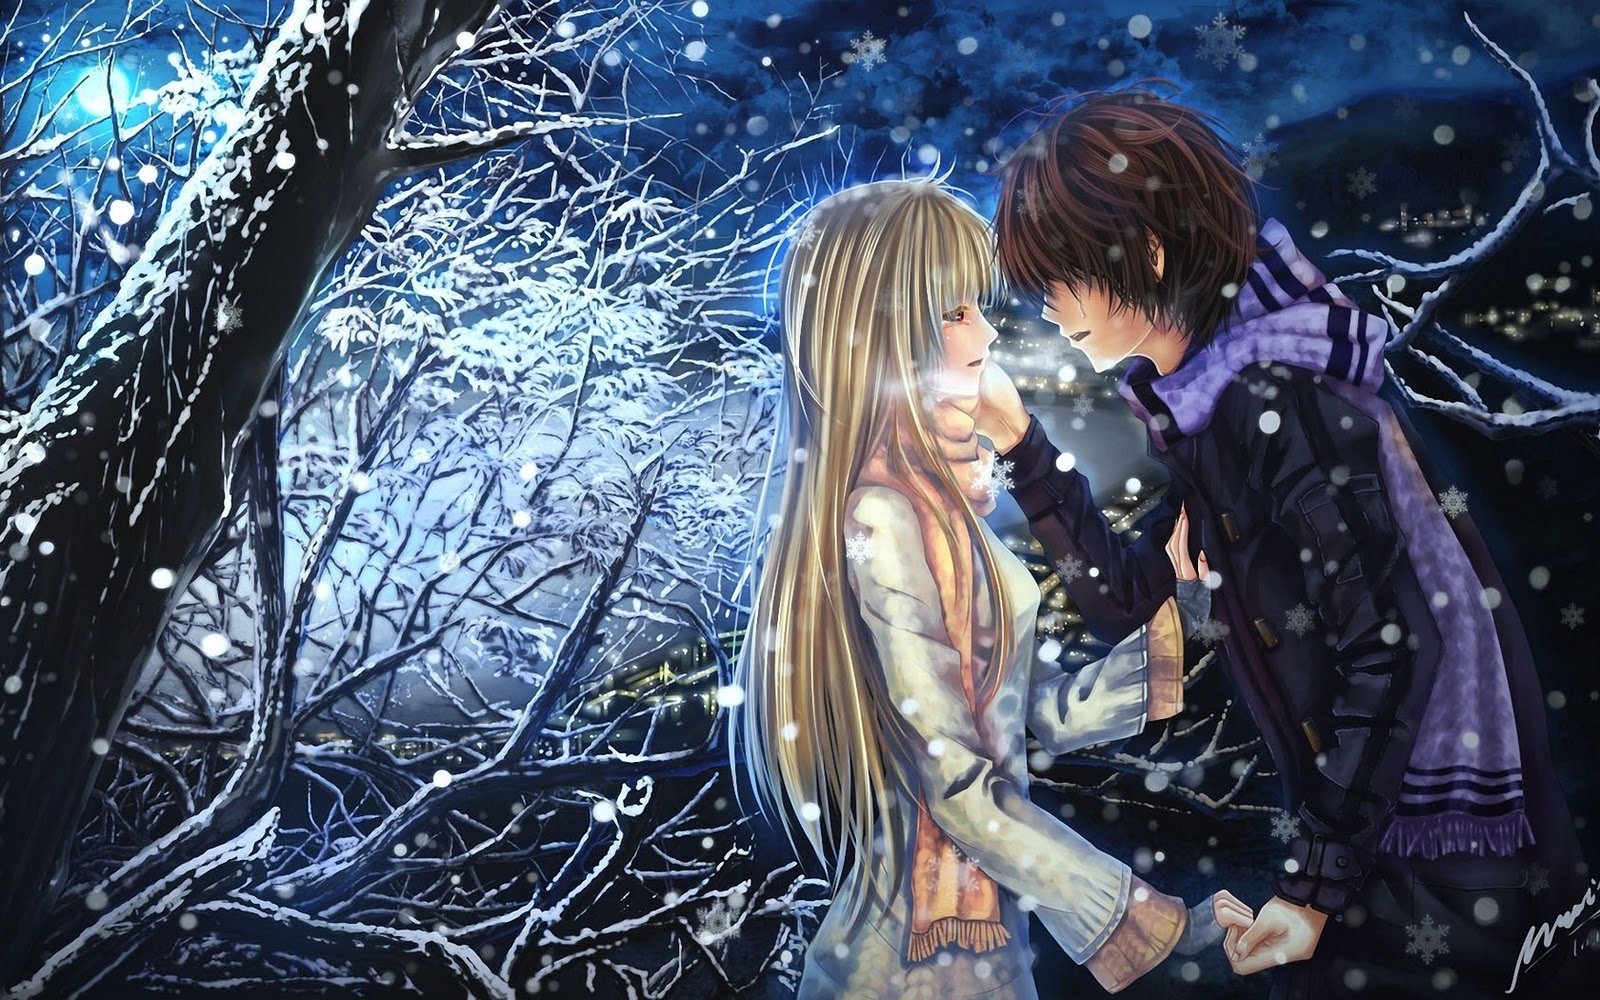 anime love couples in love hd wallpaper 1024x678 anime couple in love